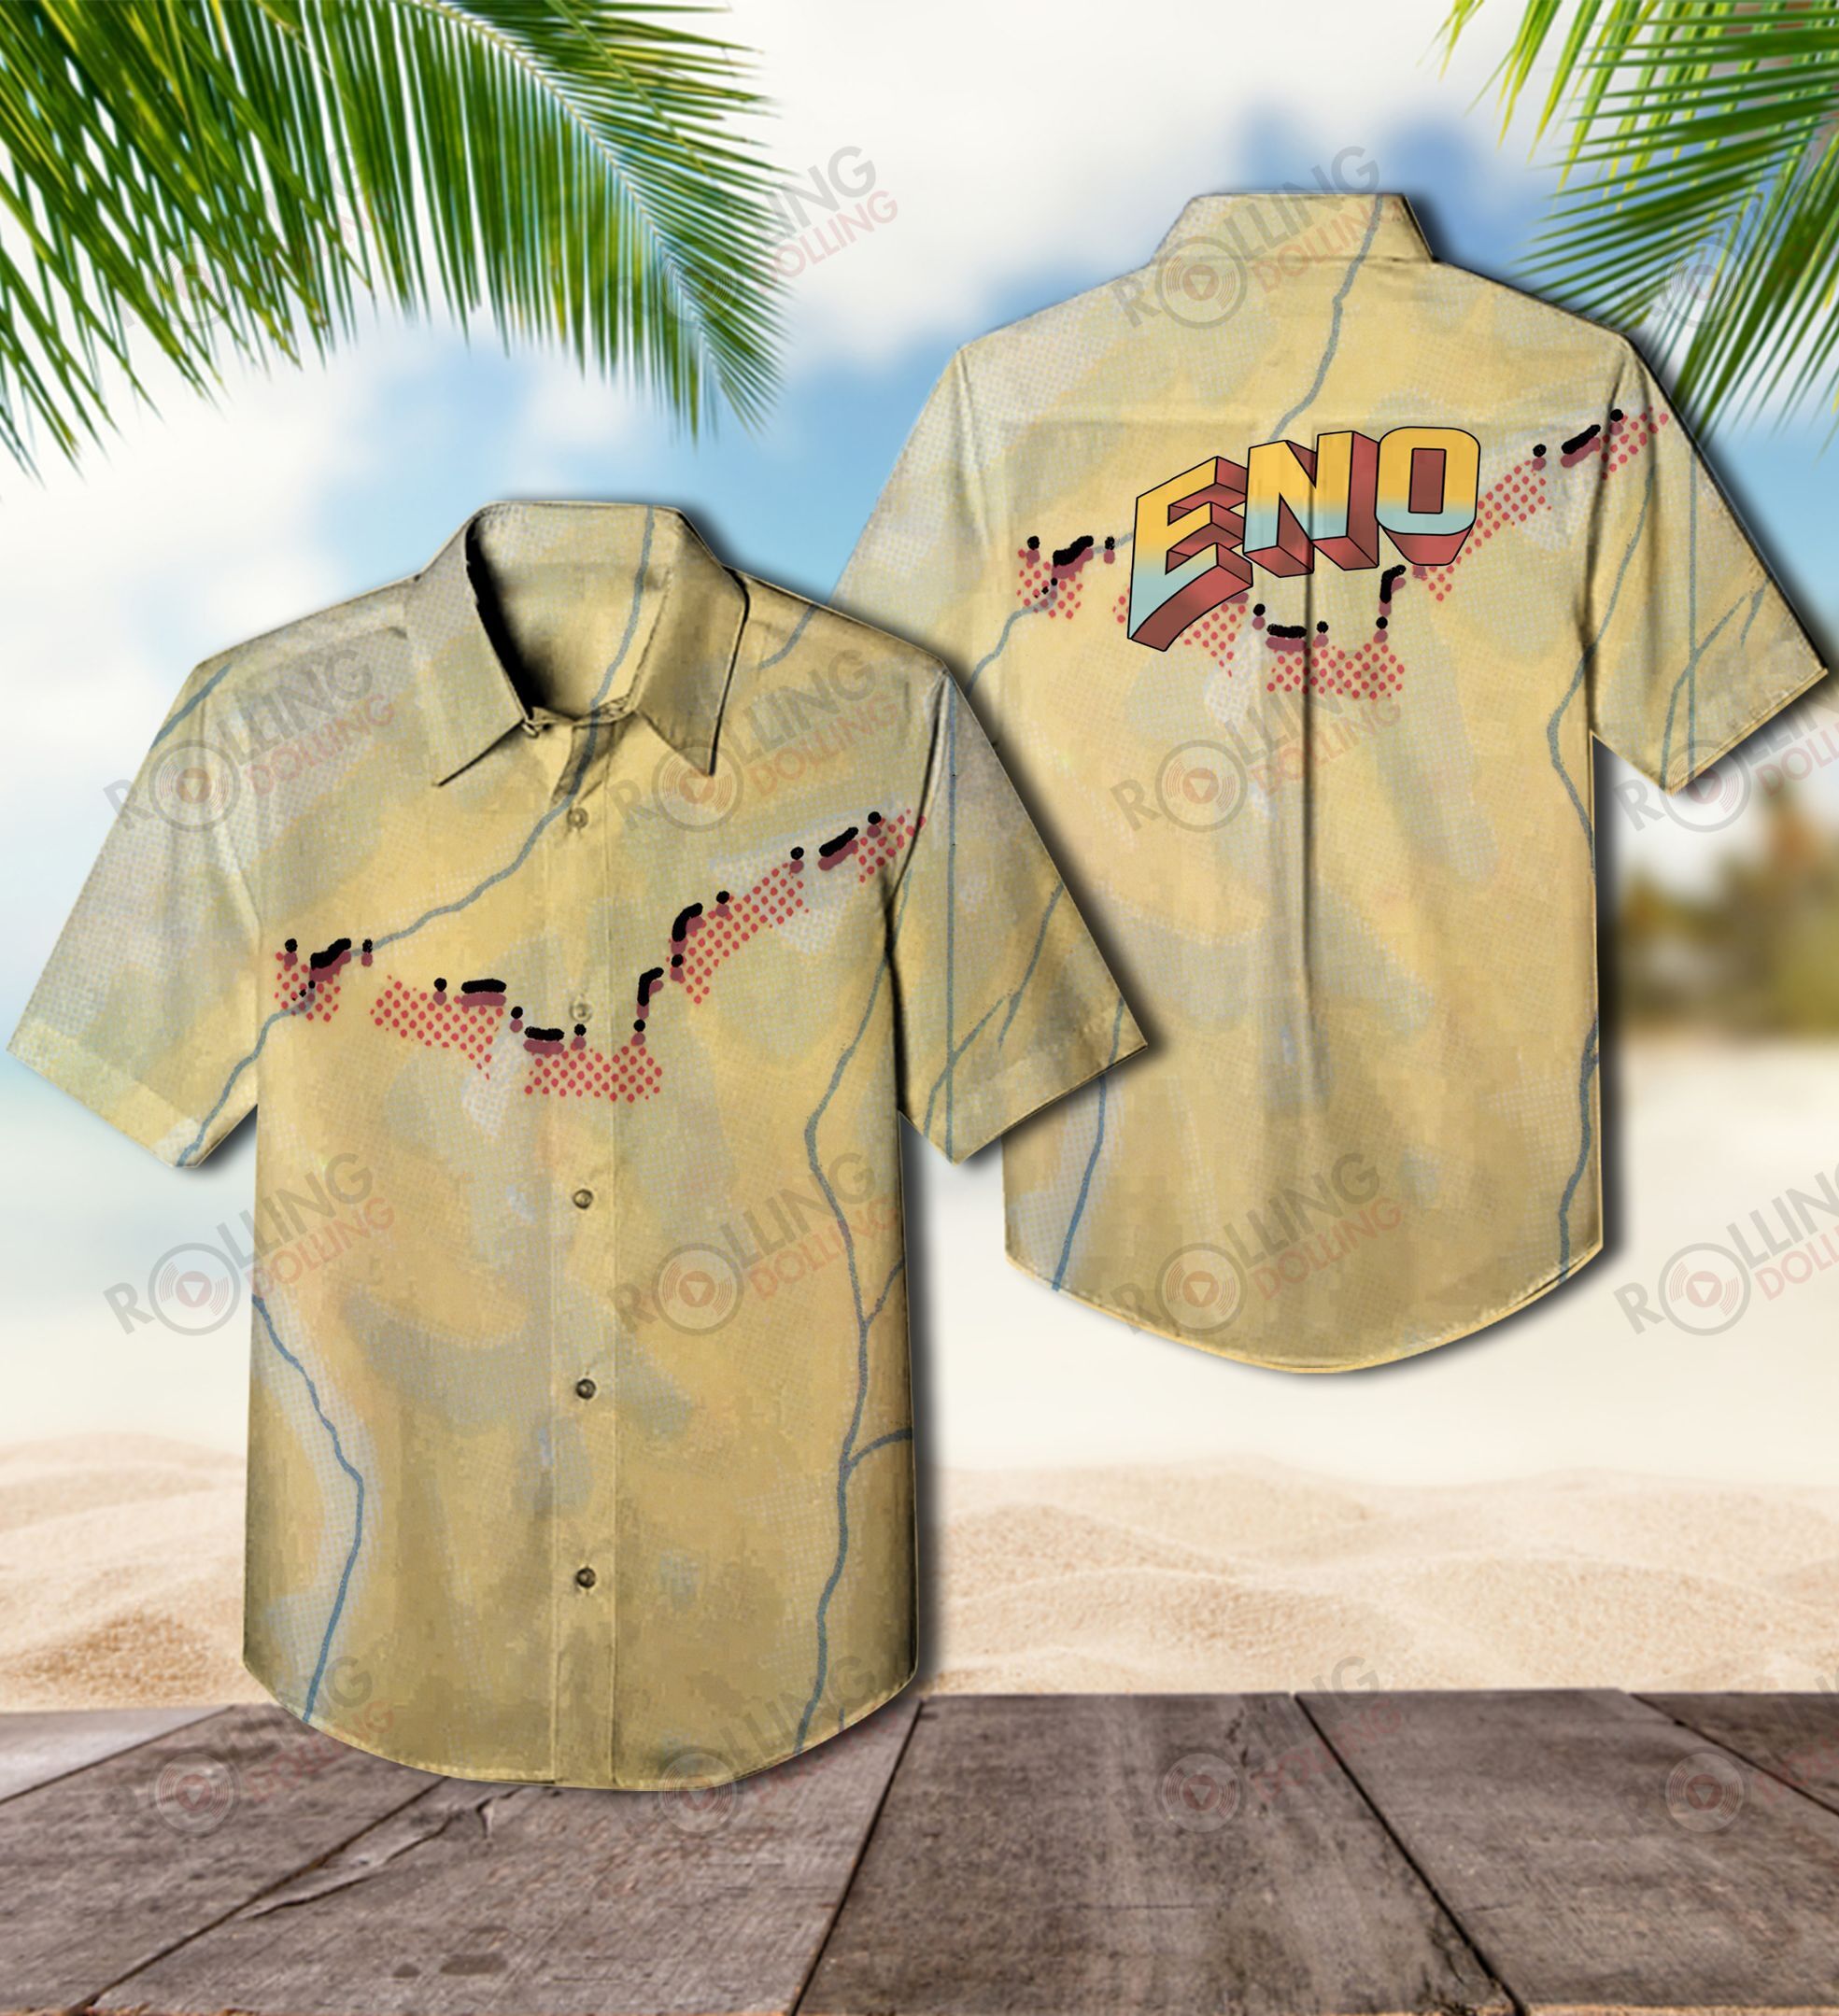 For summer, consider wearing This Amazing Hawaiian Shirt shirt in our store 150